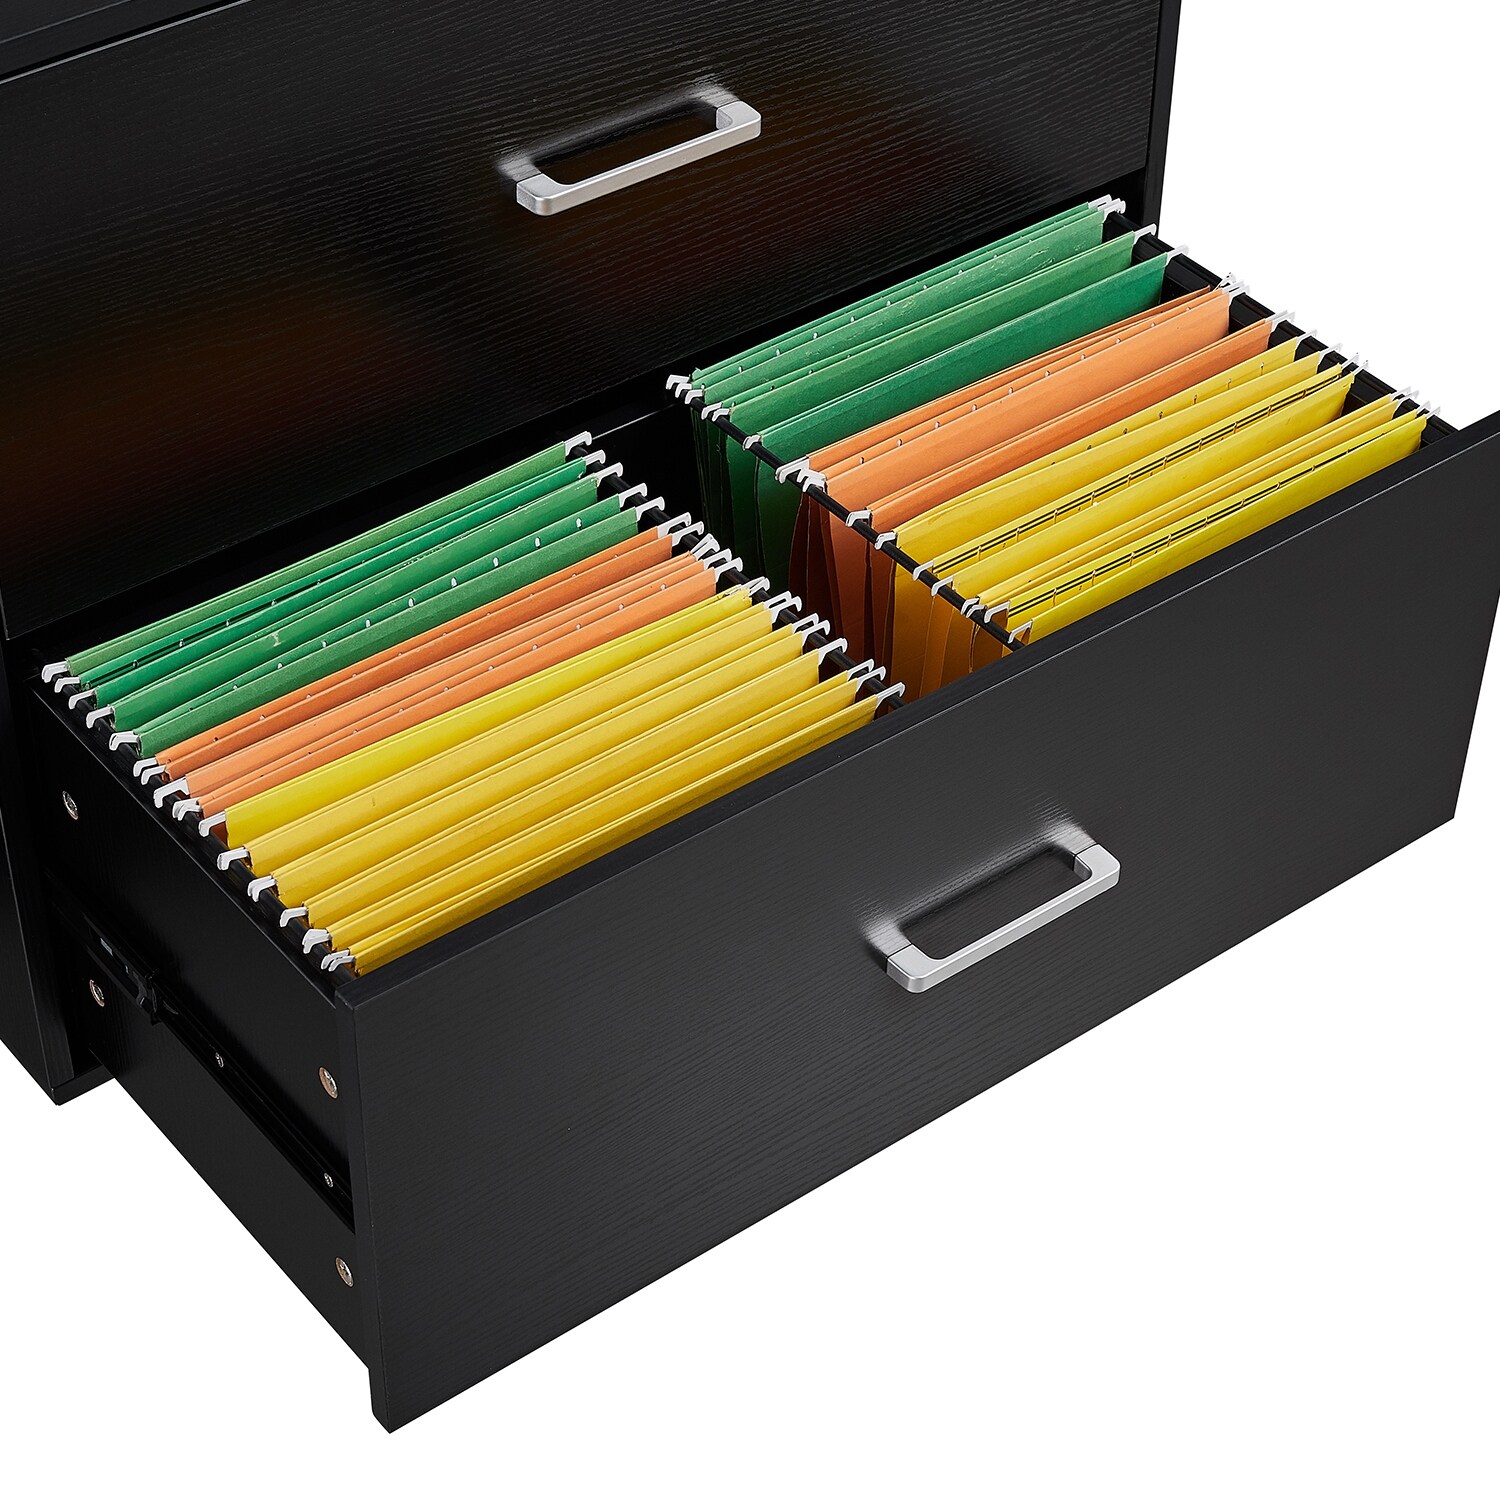 Black Wooden Filing Cabinet with Two Drawers - Suitable for Legal, Letter, A4 Paper Documents